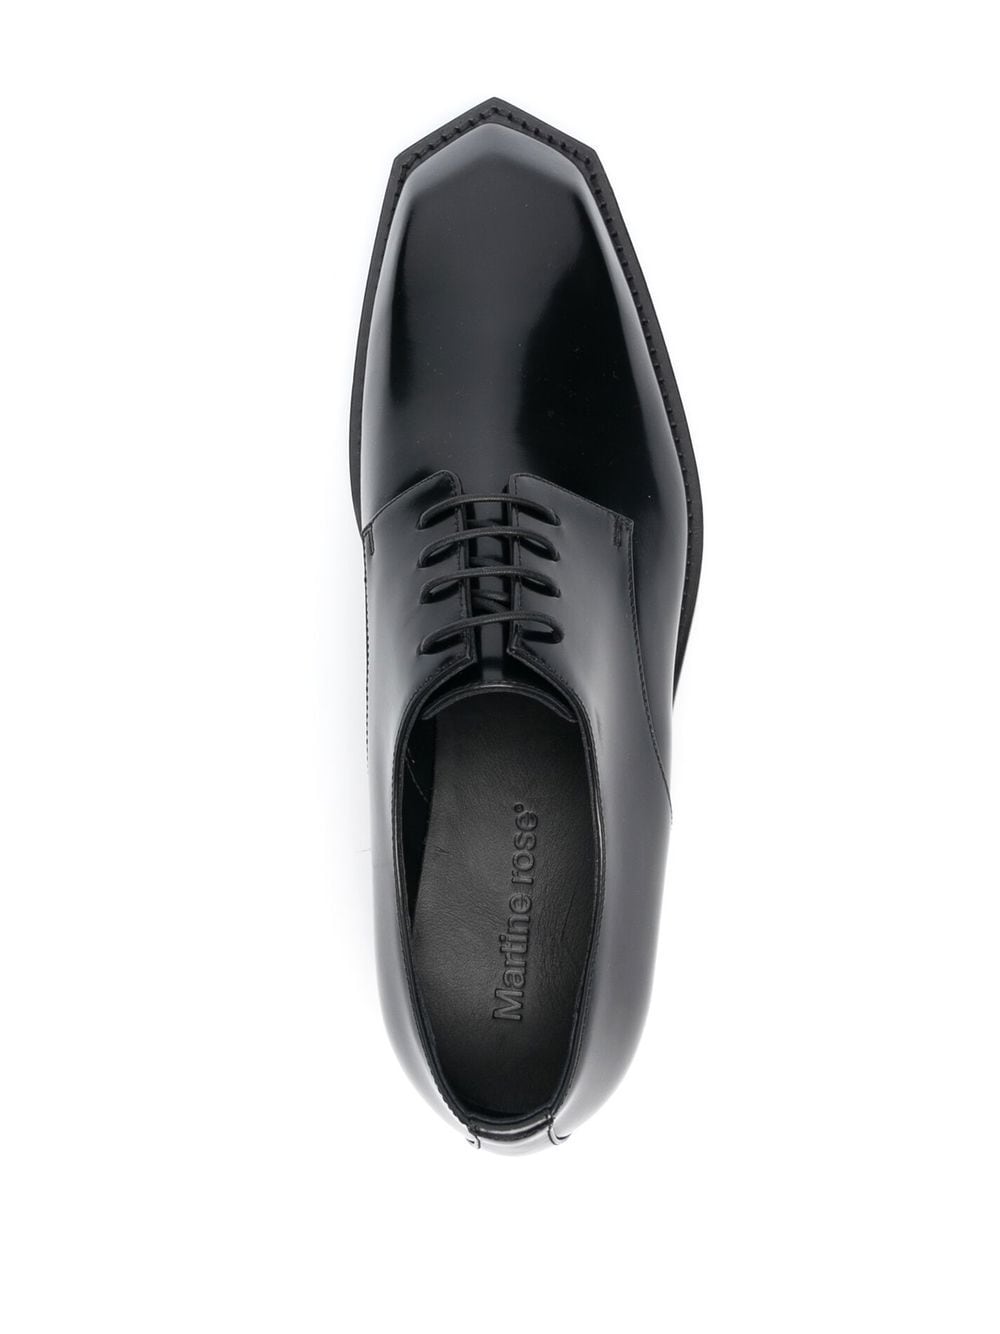 Martine Rose Shoes for Men - FARFETCH